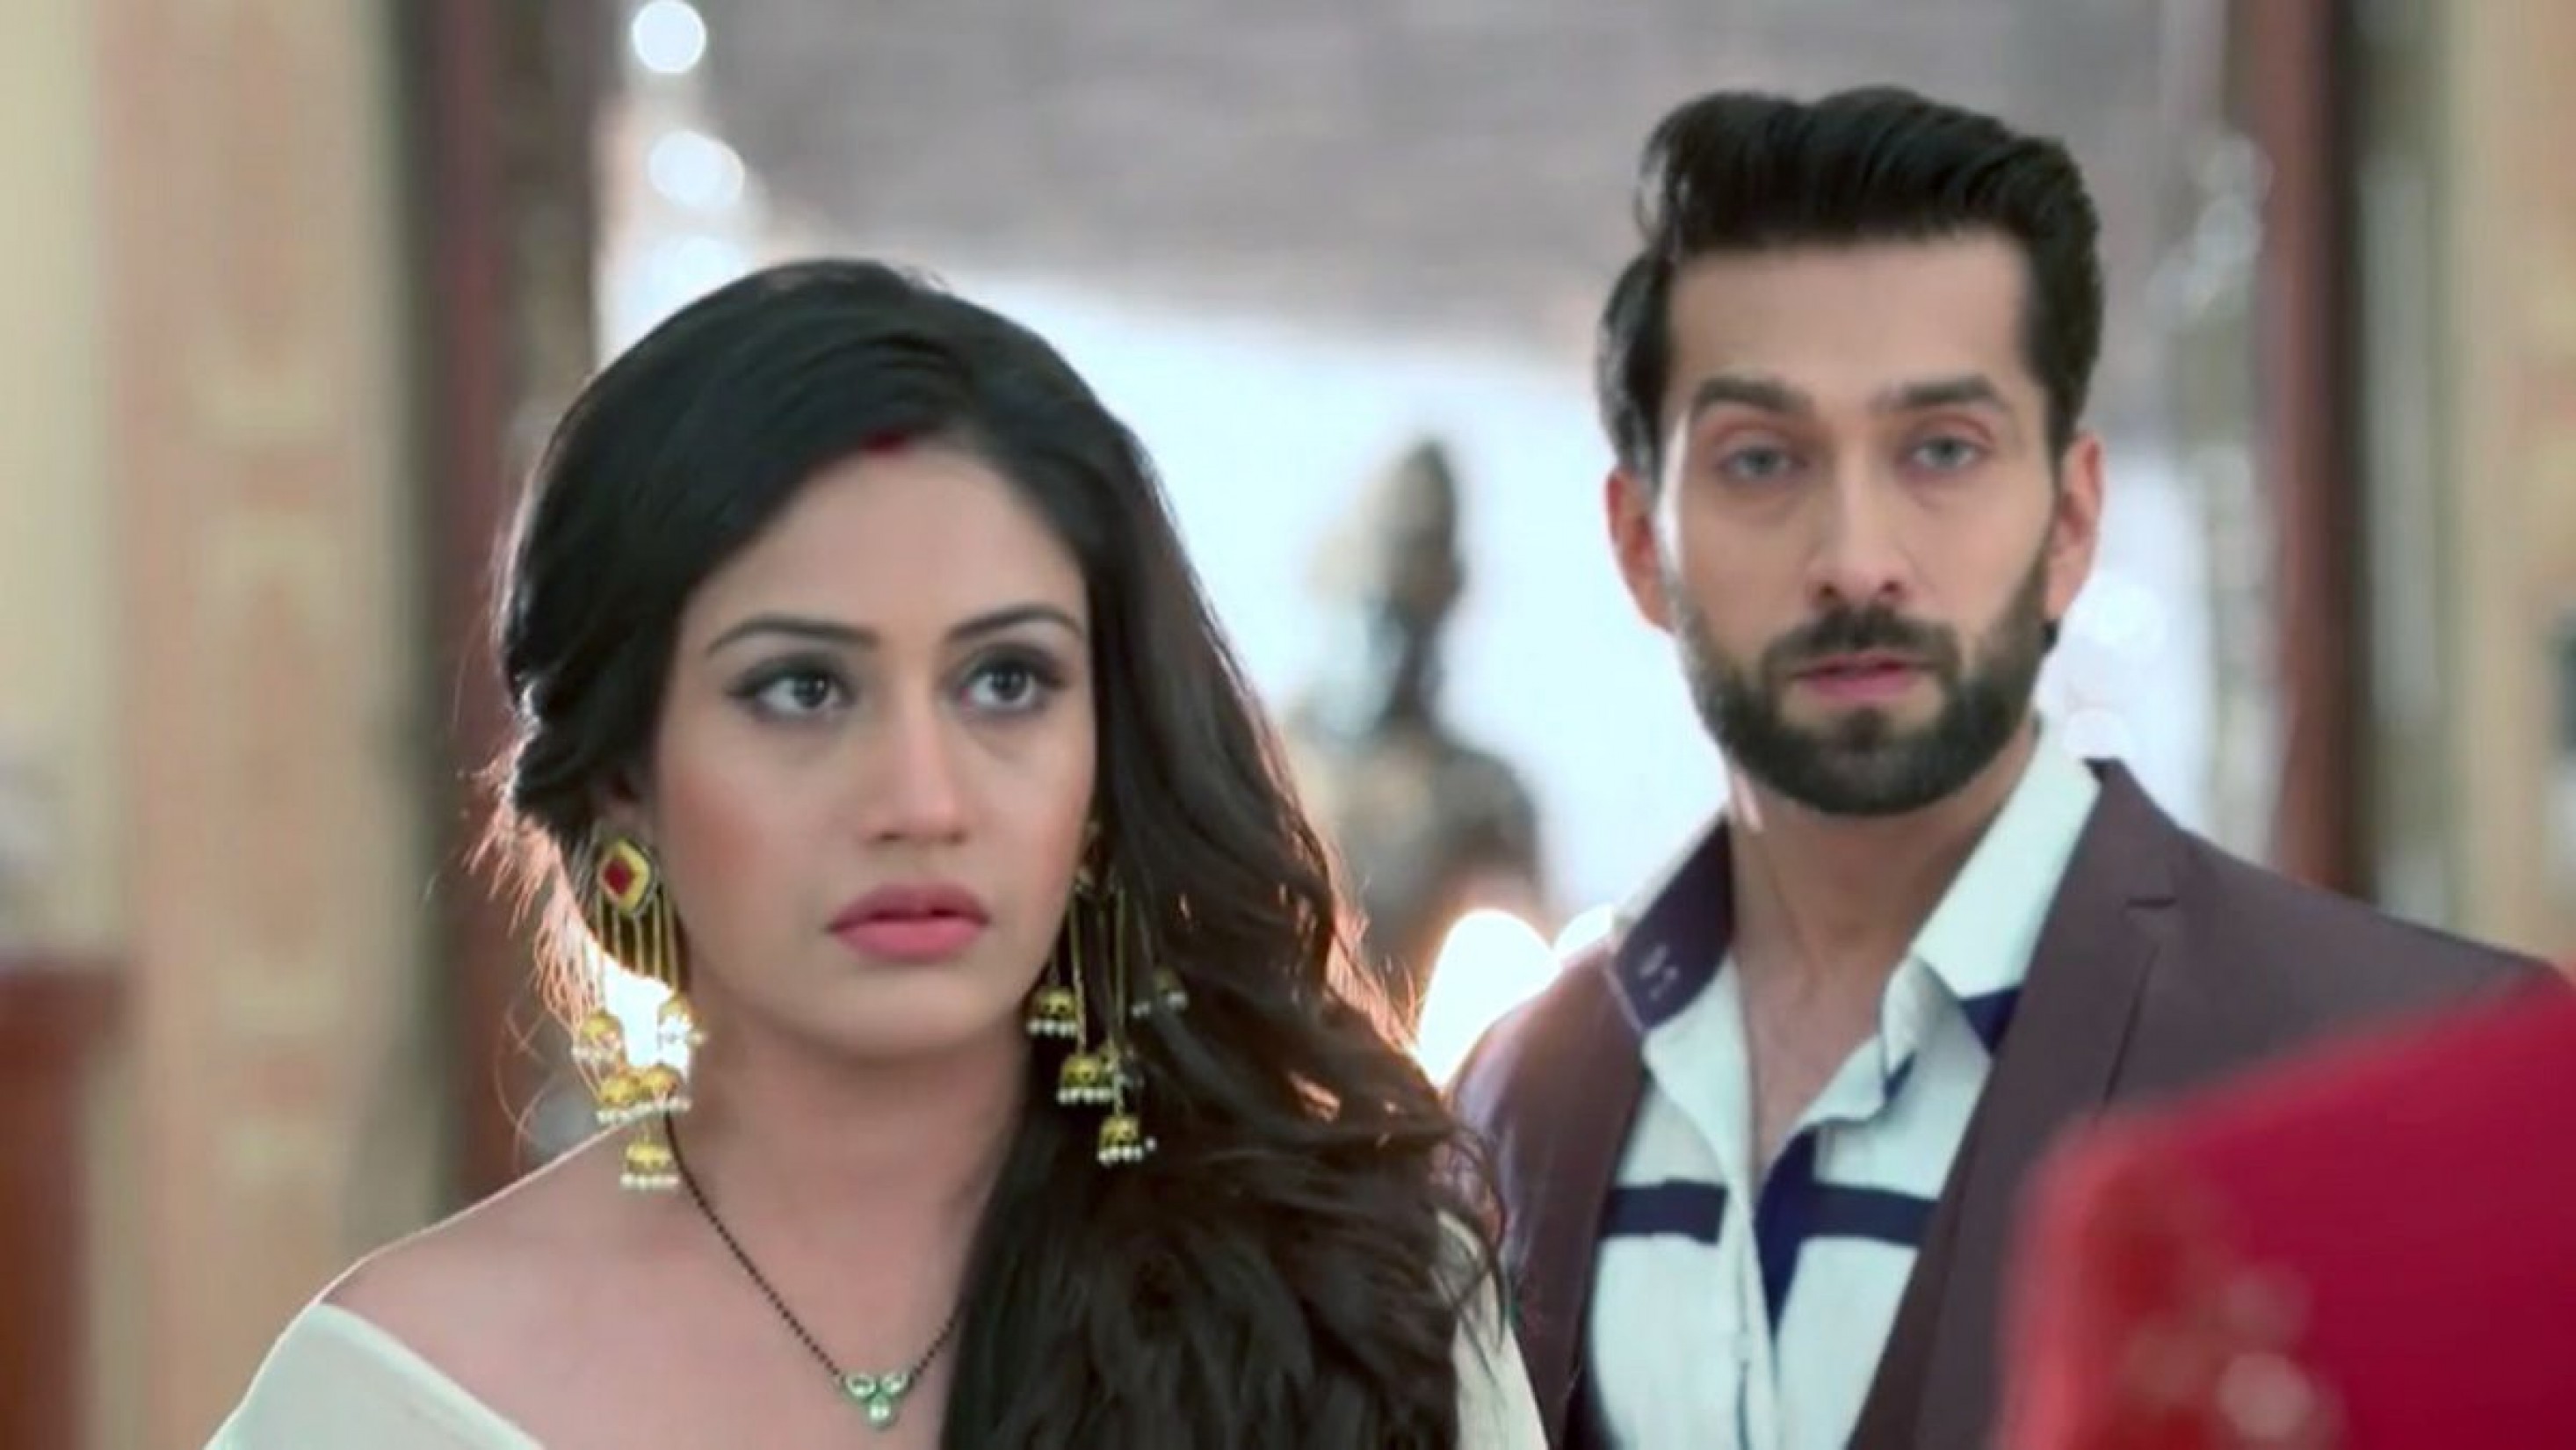 Ishqbaaz Tv Serial Shivaay Anika Hd Images Freshwidewallpapers Com 4k 5k 8k Hd Desktop Wallpapers For Ultra High Definition Widescreen Desktop Tablet Smartphone Wallpapers The show has been running for two years now with its 600 th episode telecasted in the month of august 2018. freshwidewallpapers com 4k 5k 8k hd desktop wallpapers for ultra high definition widescreen desktop tablet smartphone wallpapers